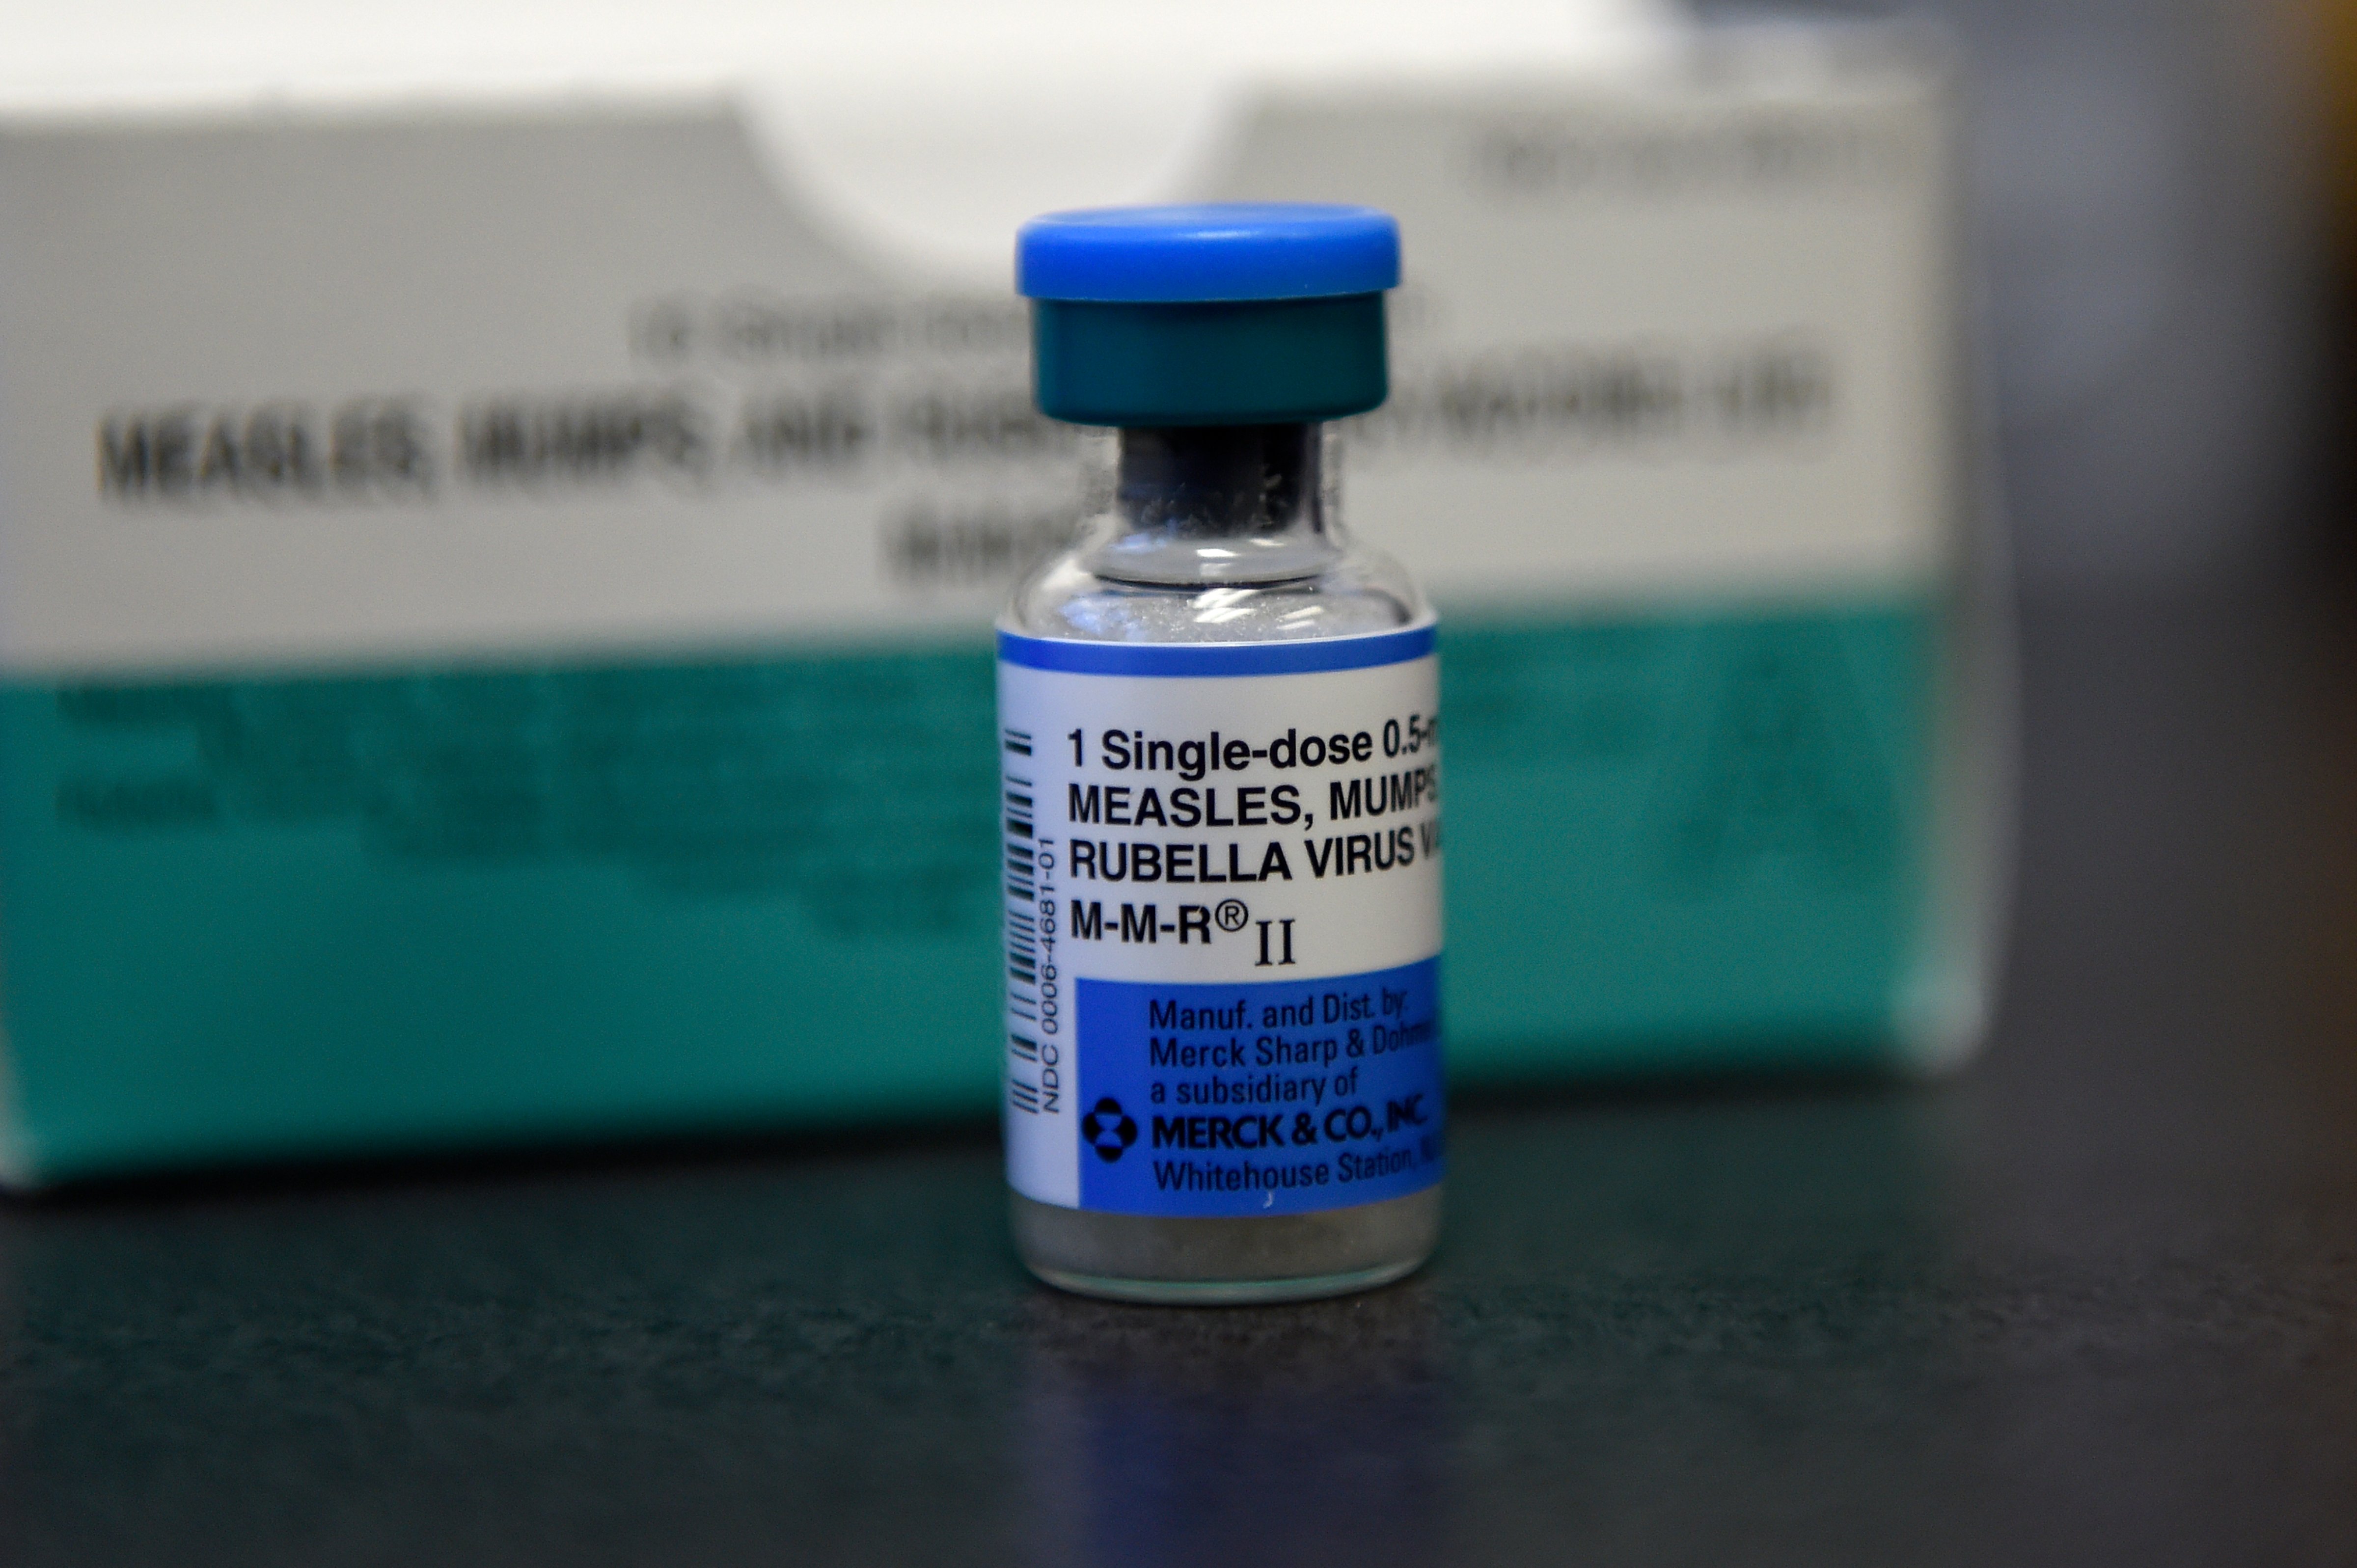 A single dose of MMR for Measles, Mumps, and Rubella at Kaiser Permanente East Medical offices on Feb. 3, 2015 in Denver, CO.